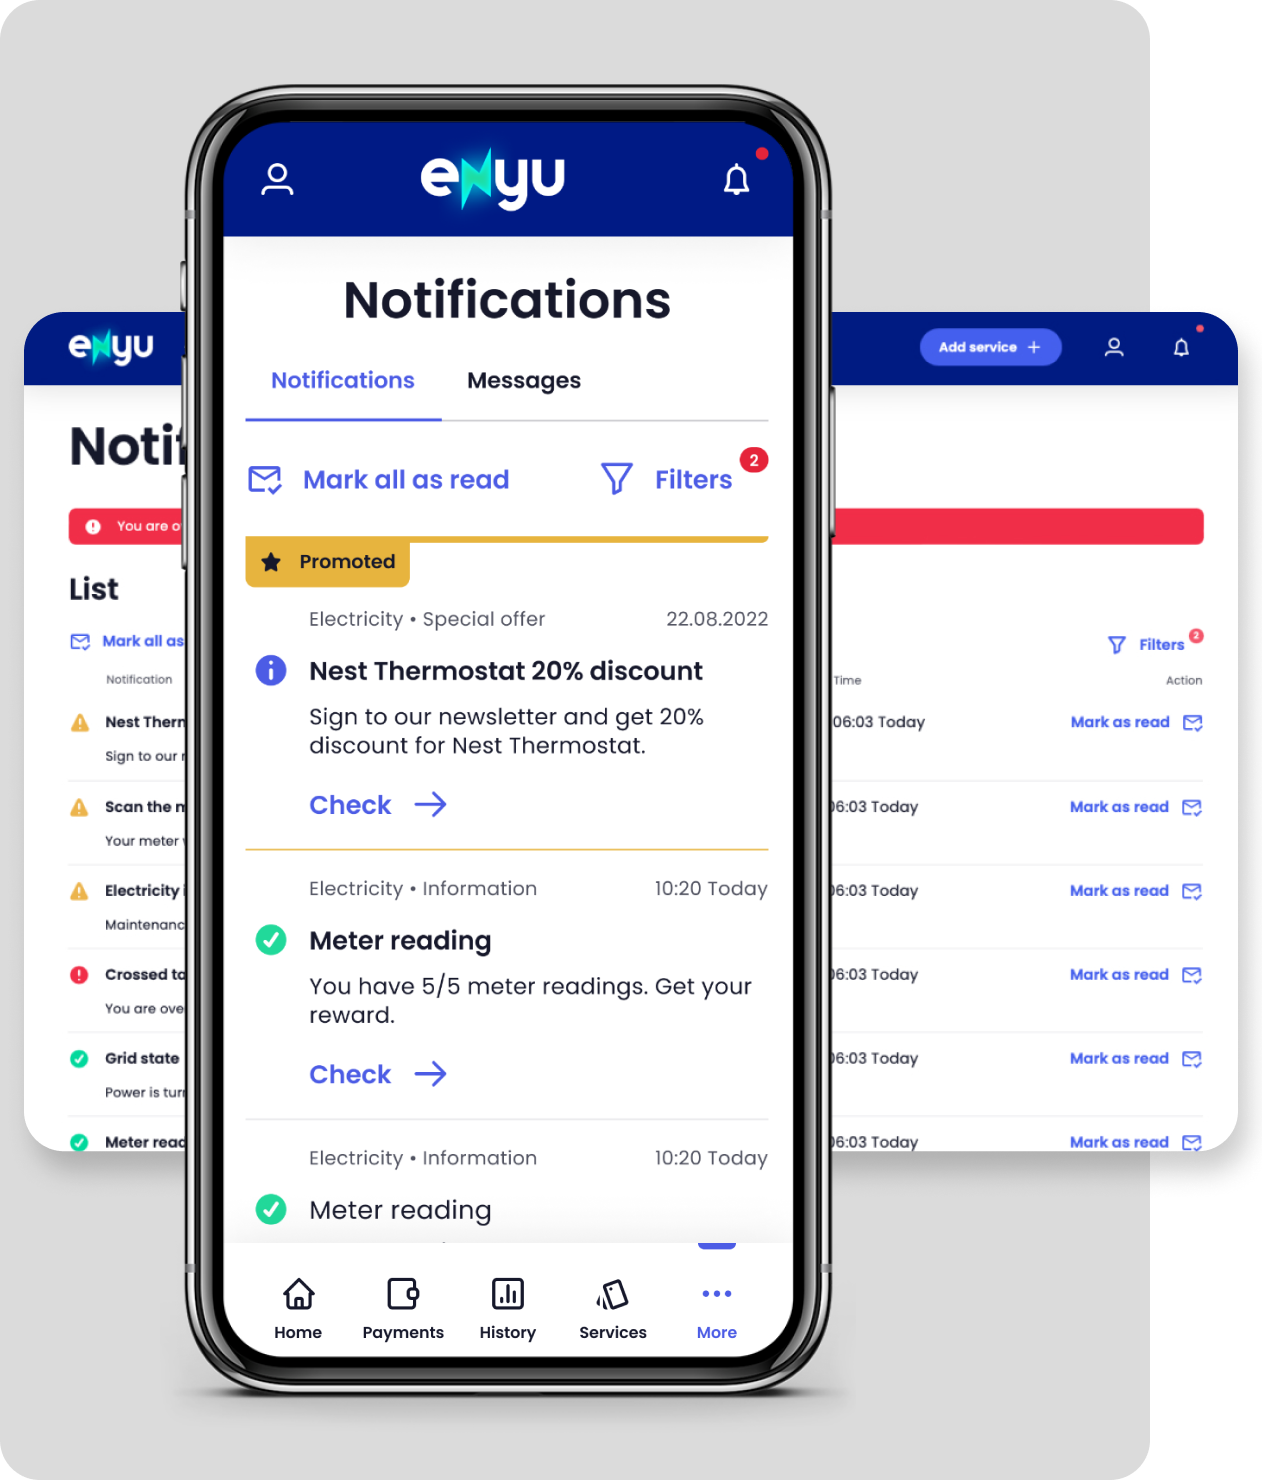 Enyu self care mobile app for energy and utilities showing a screen of push notifications and information relevant for the customer